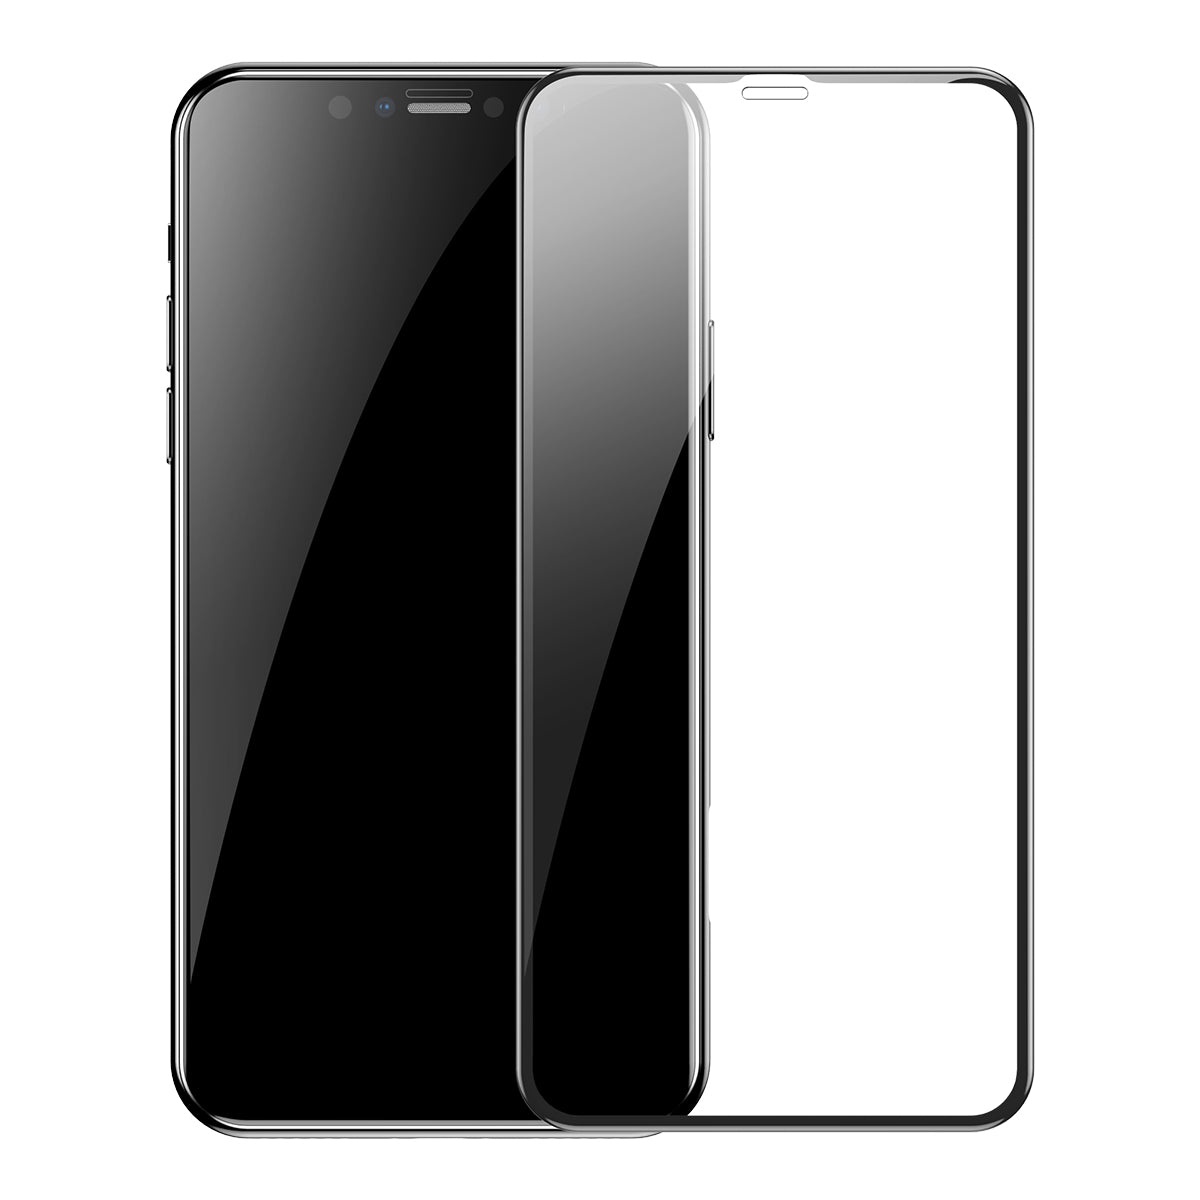 BASEUS 0.3mm Full-screen and Full-glass Tempered Glass Film (2 pcs) for iPhone 11 Pro Max / 11 Pro / 11 / XS Max / XS / X / XR